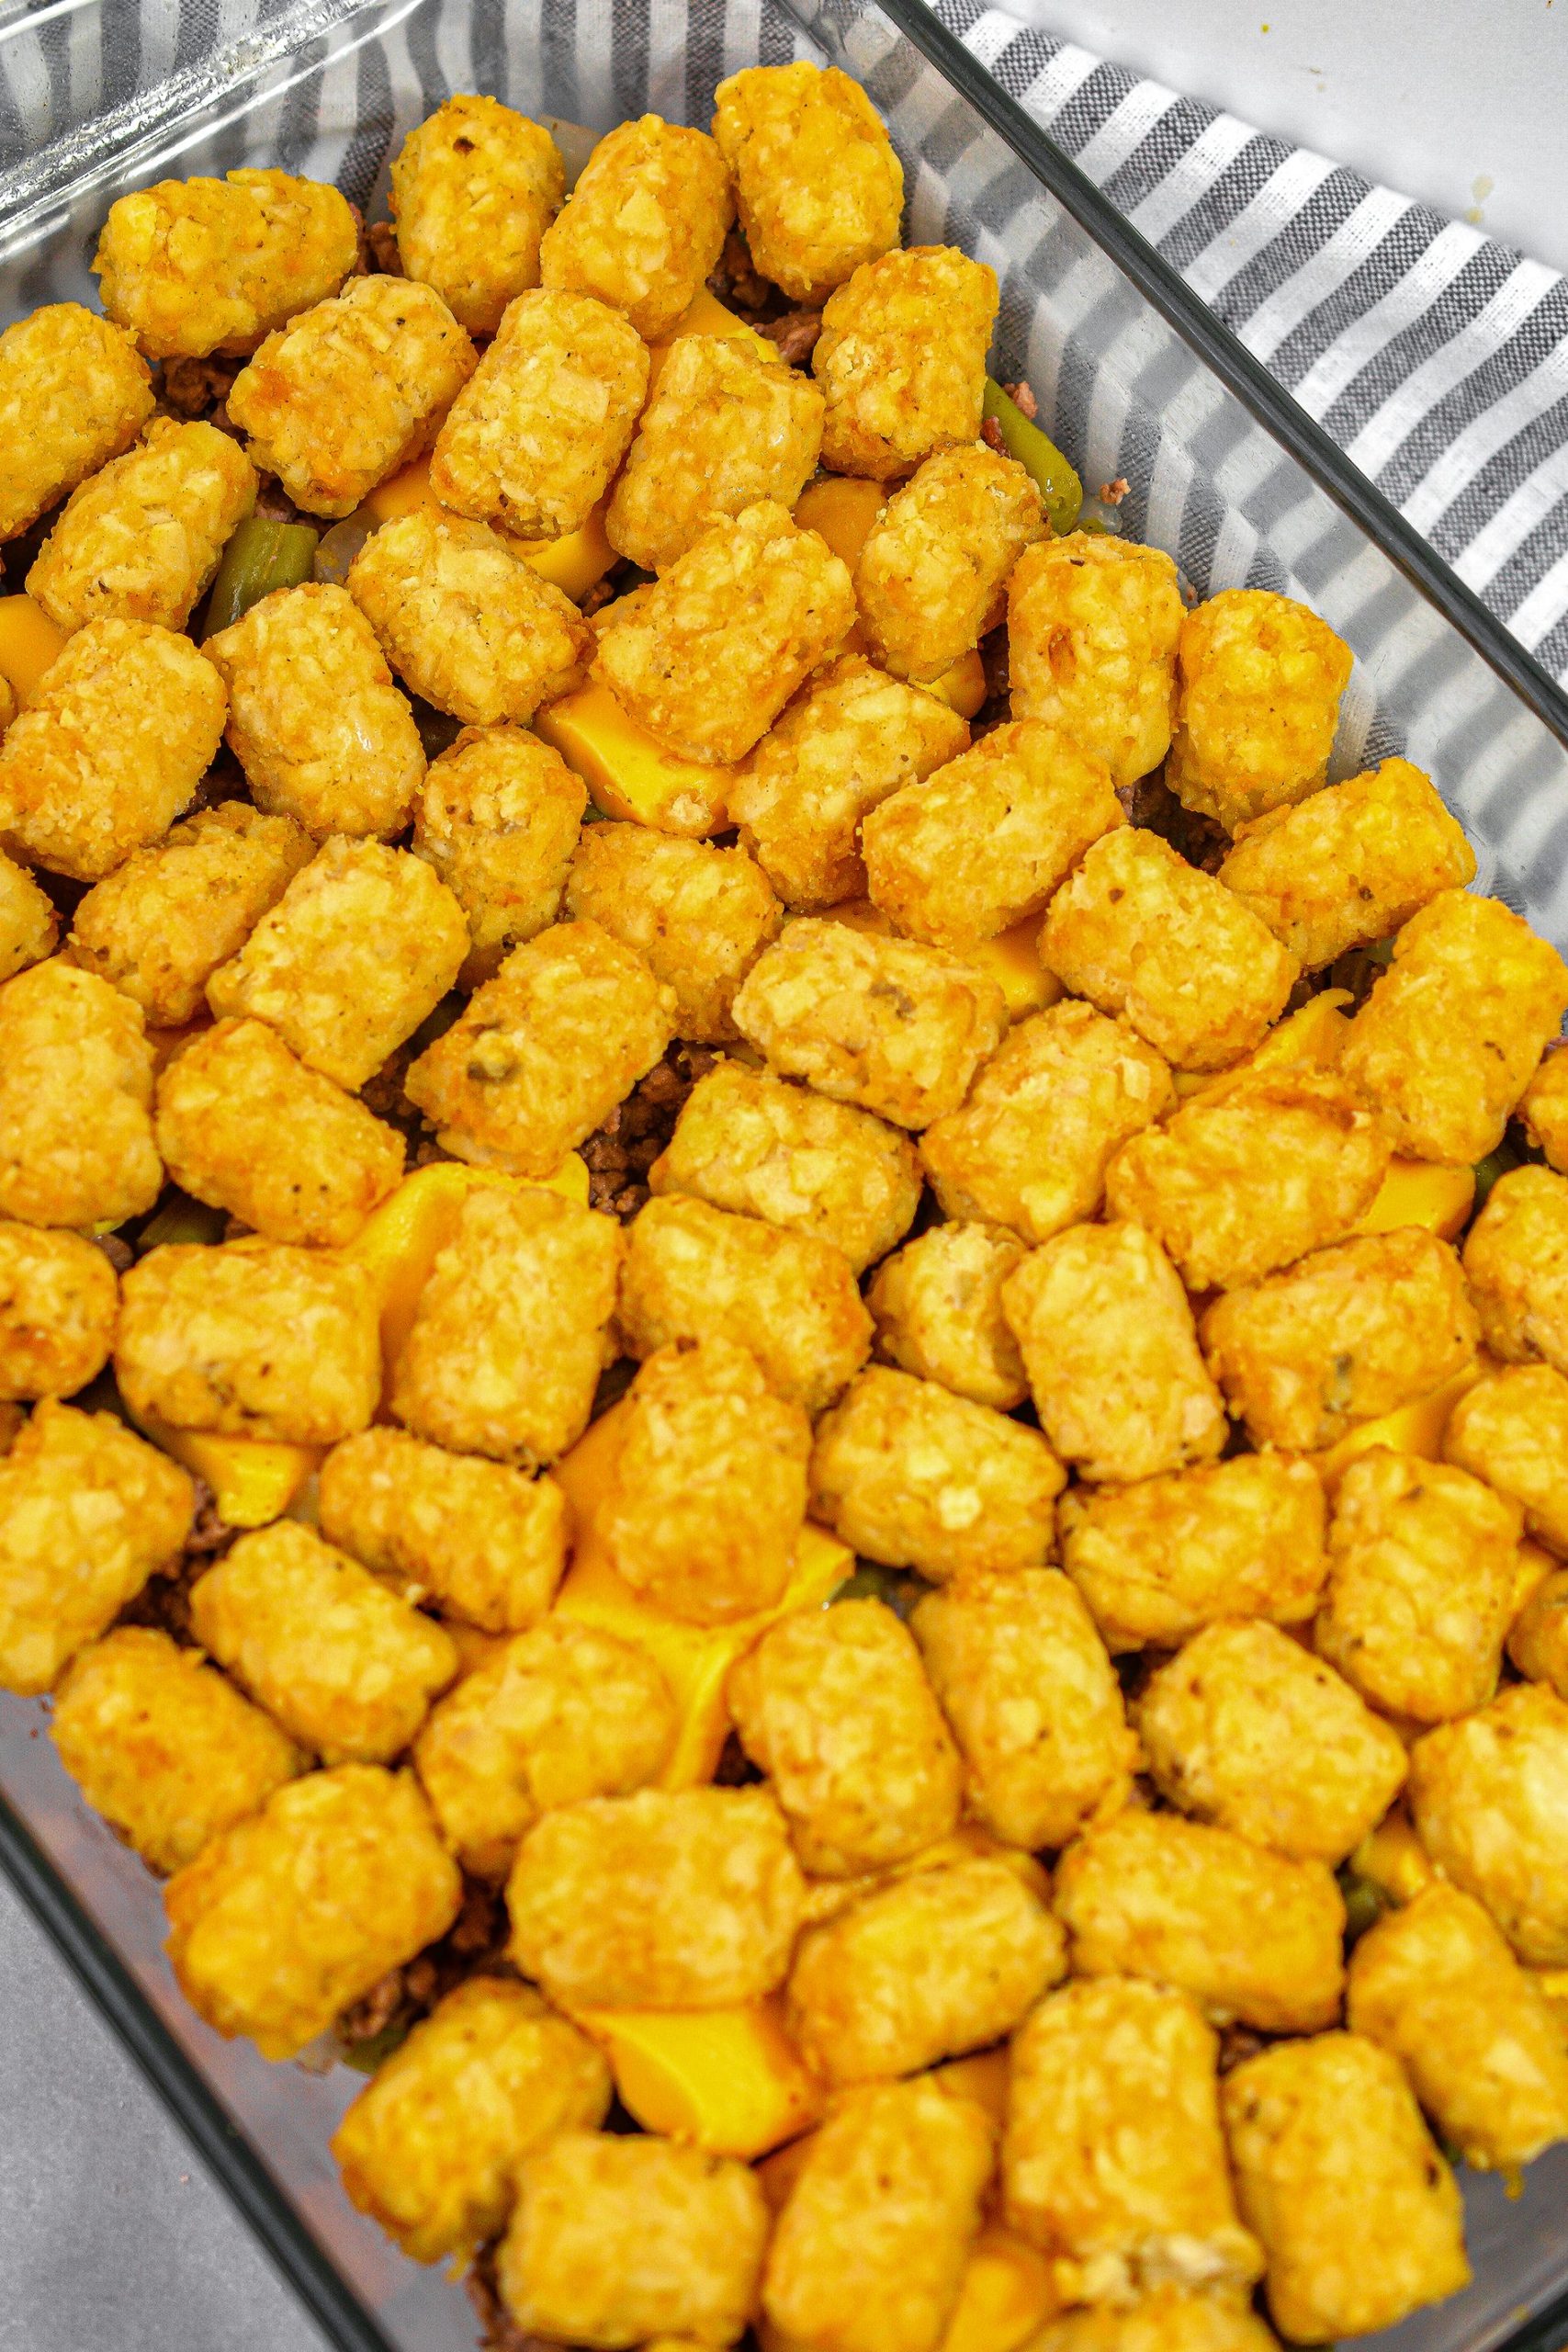 Place a layer of tater tots on top of the mixture.